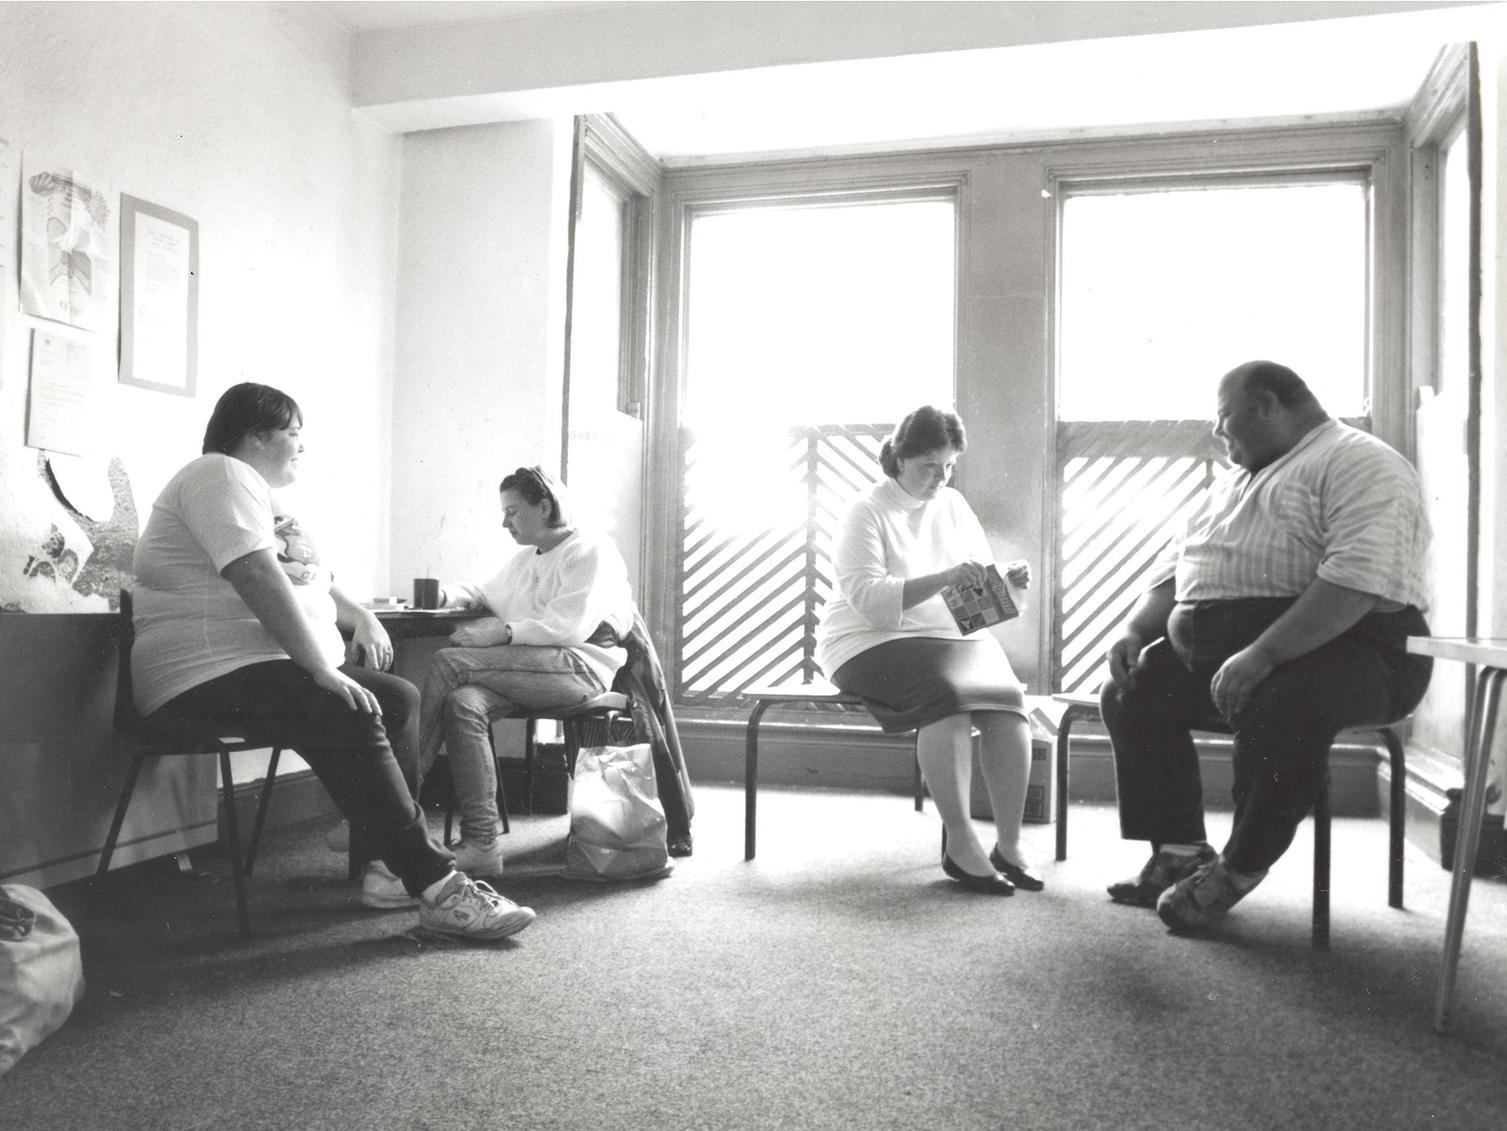 Visitors to the drop-in group at Hall Lane Community Centre in Armley which was under the threat of closure in the early 1990s.